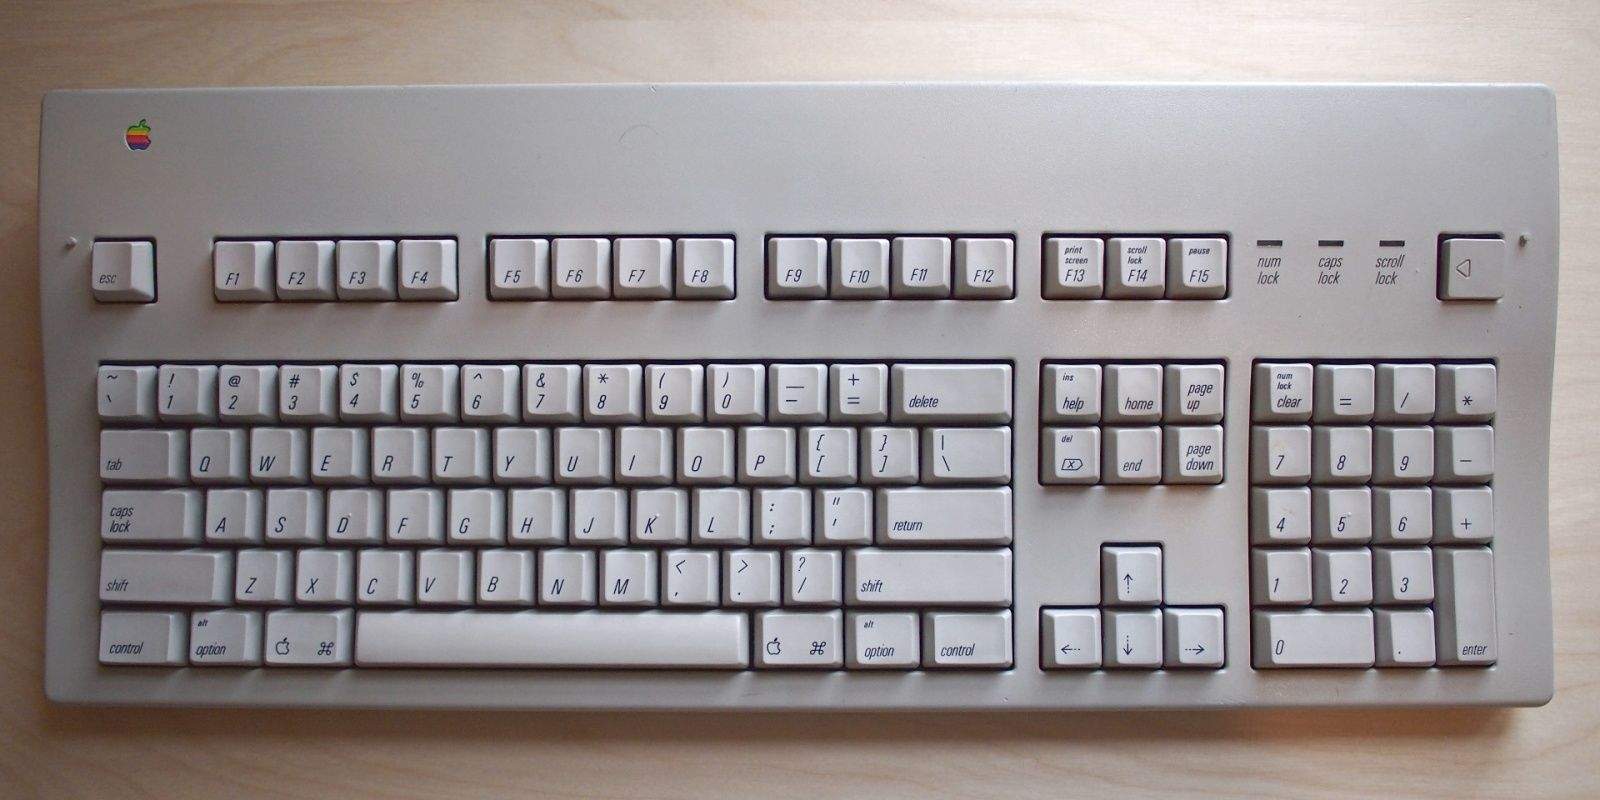 You can turn your Apple Extended Keyboard into a full computer. Photo: University of Chicago